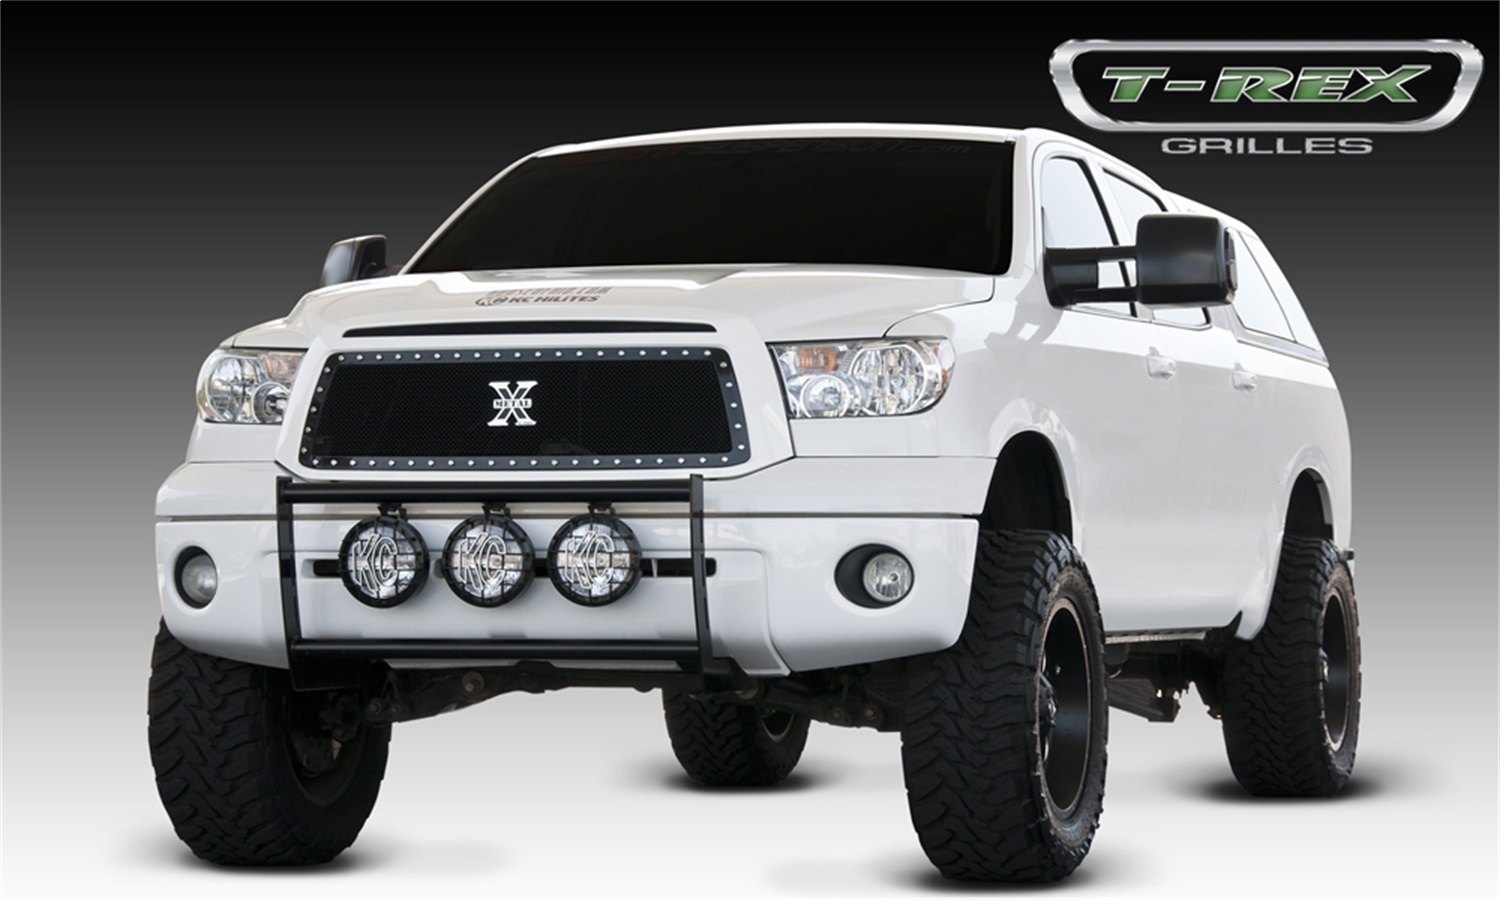 T-Rex Grilles T-Rex Grilles 6719631 X-Metal Series; Studded Main Grille Insert Fits Tundra